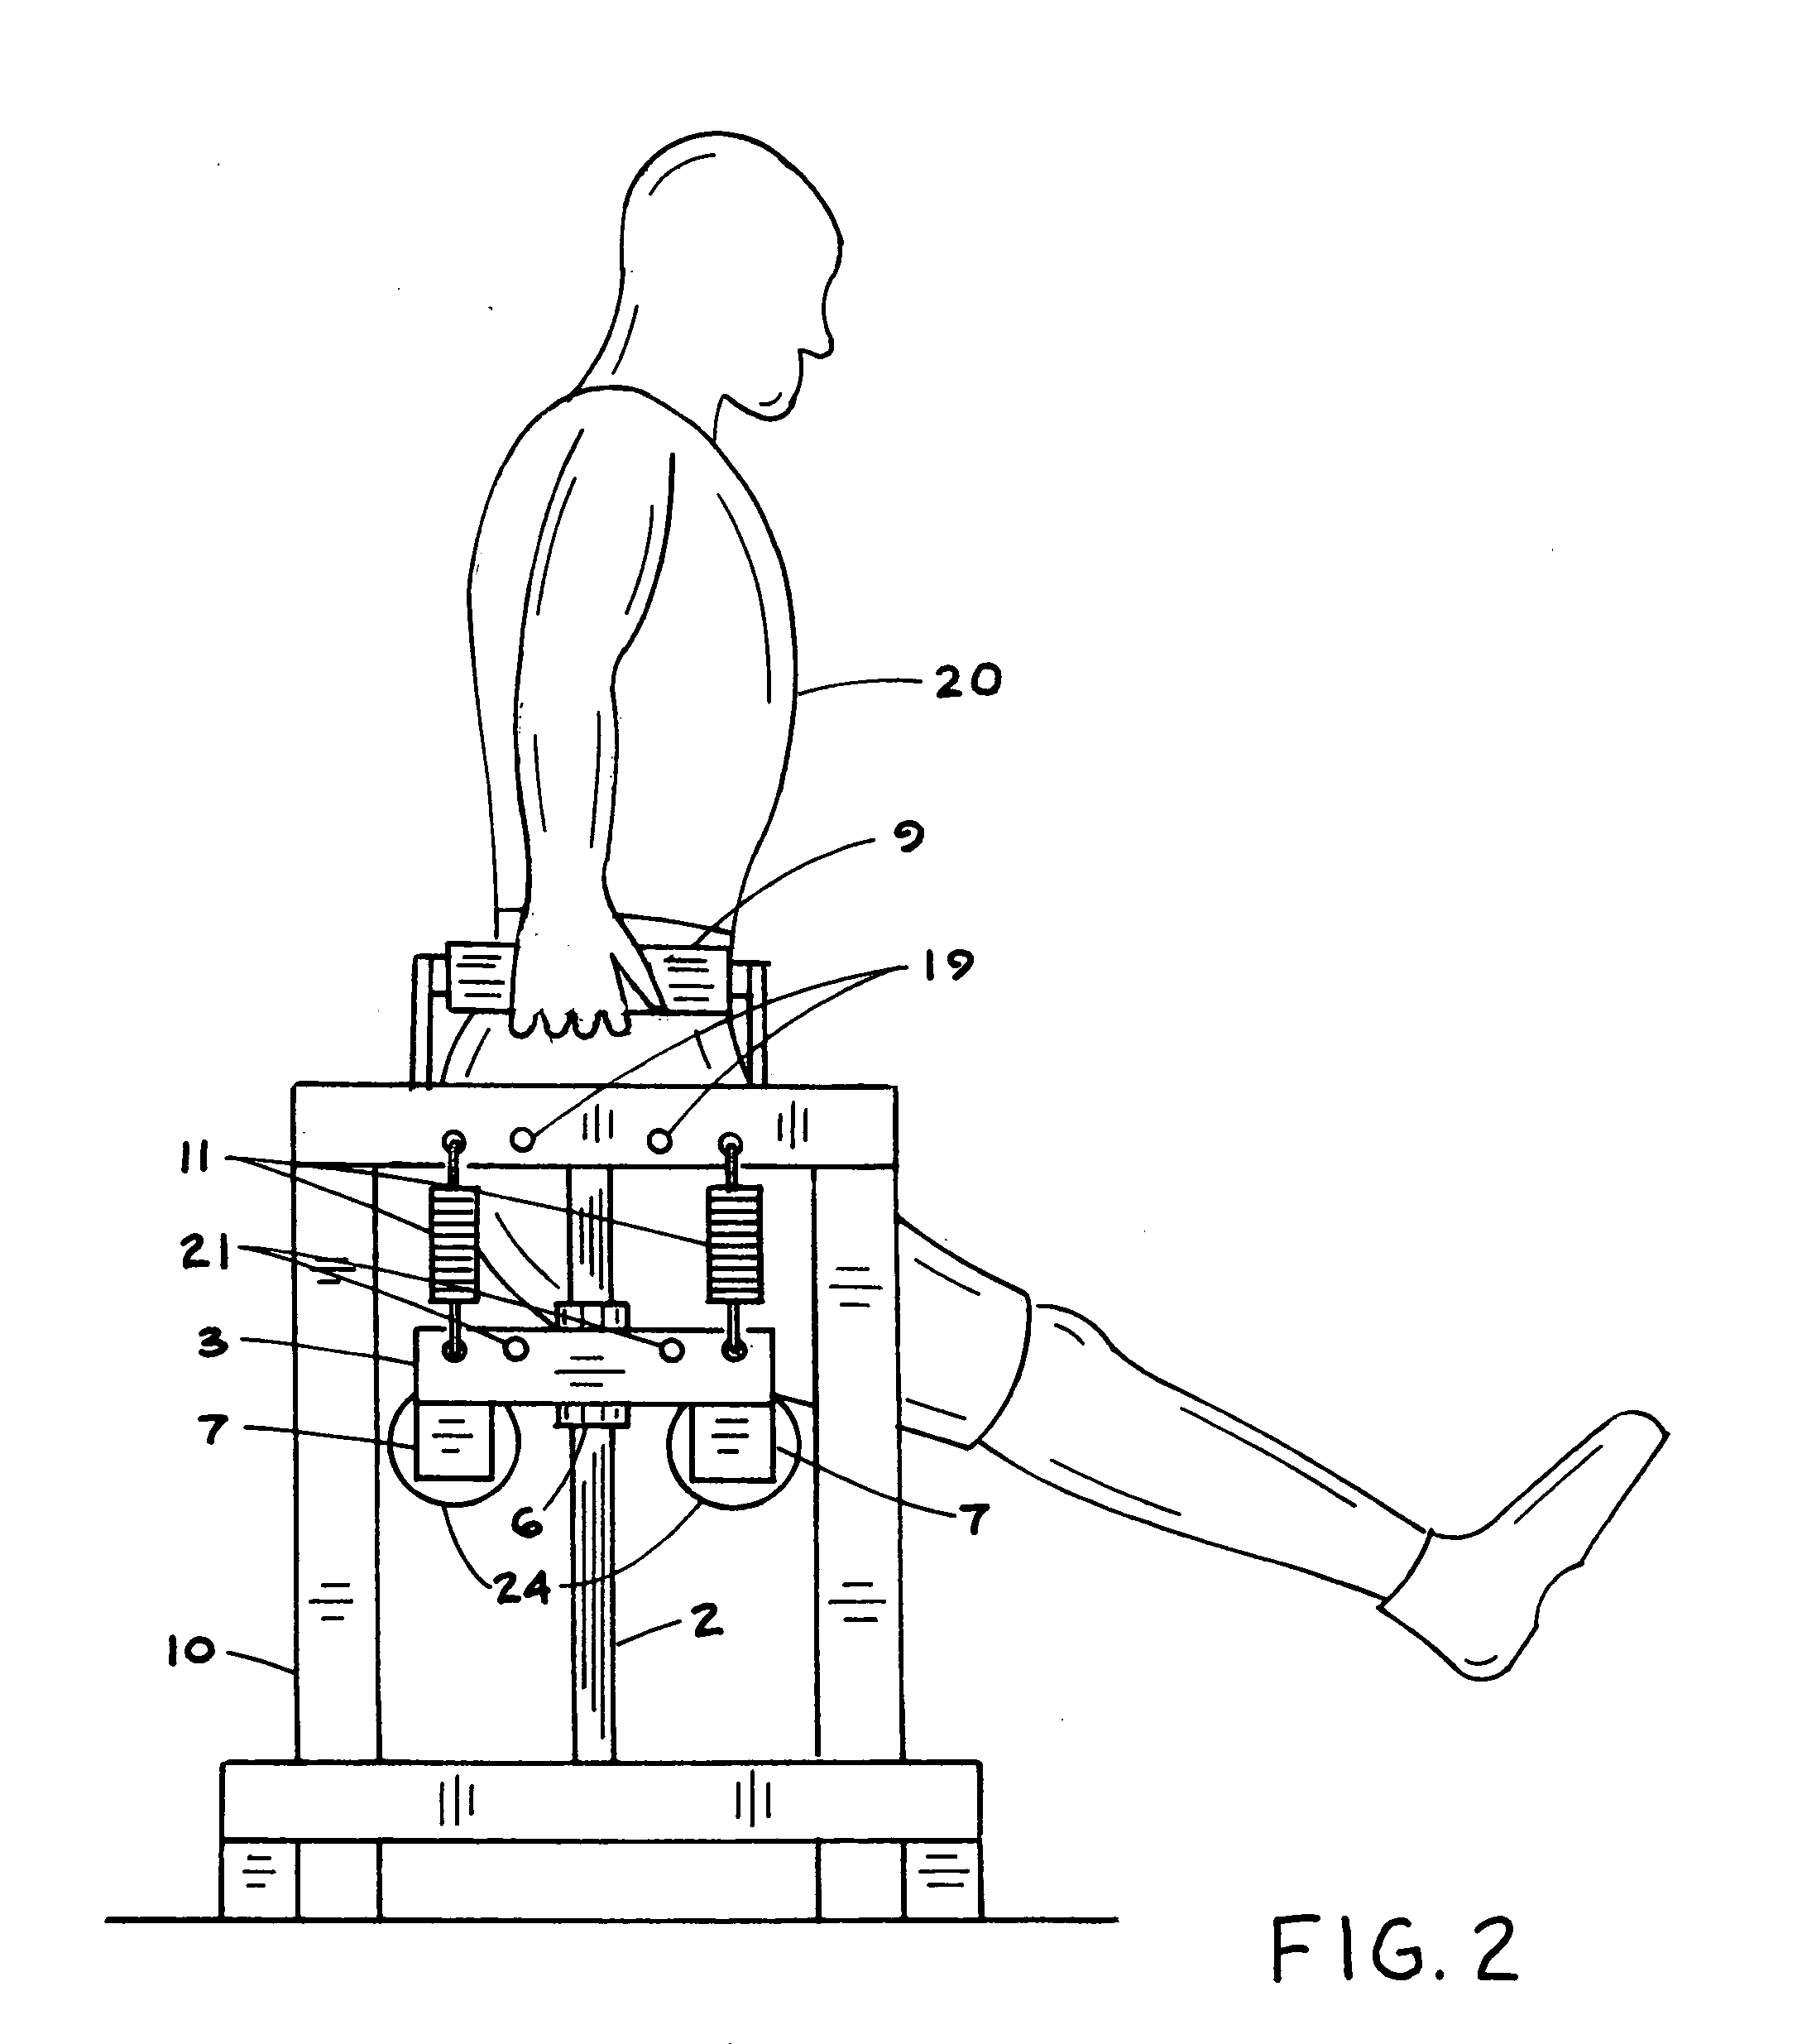 Push-up and dip assist exercise apparatus